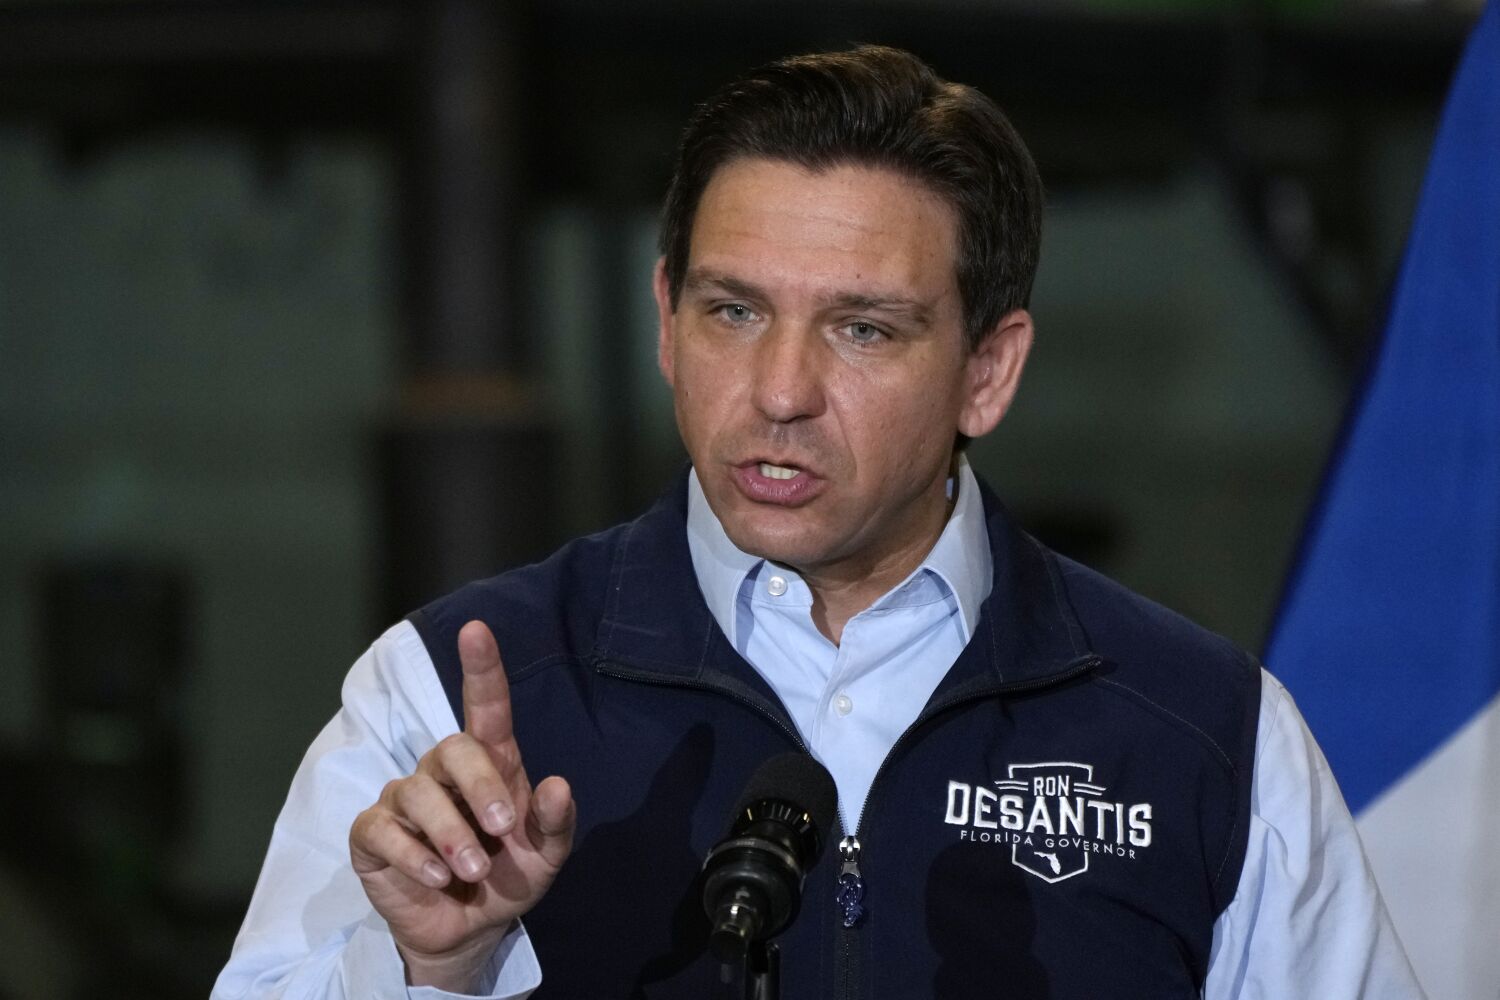 Column: Hey DeSantis, real tough guys don't use vulnerable immigrants as political pawns